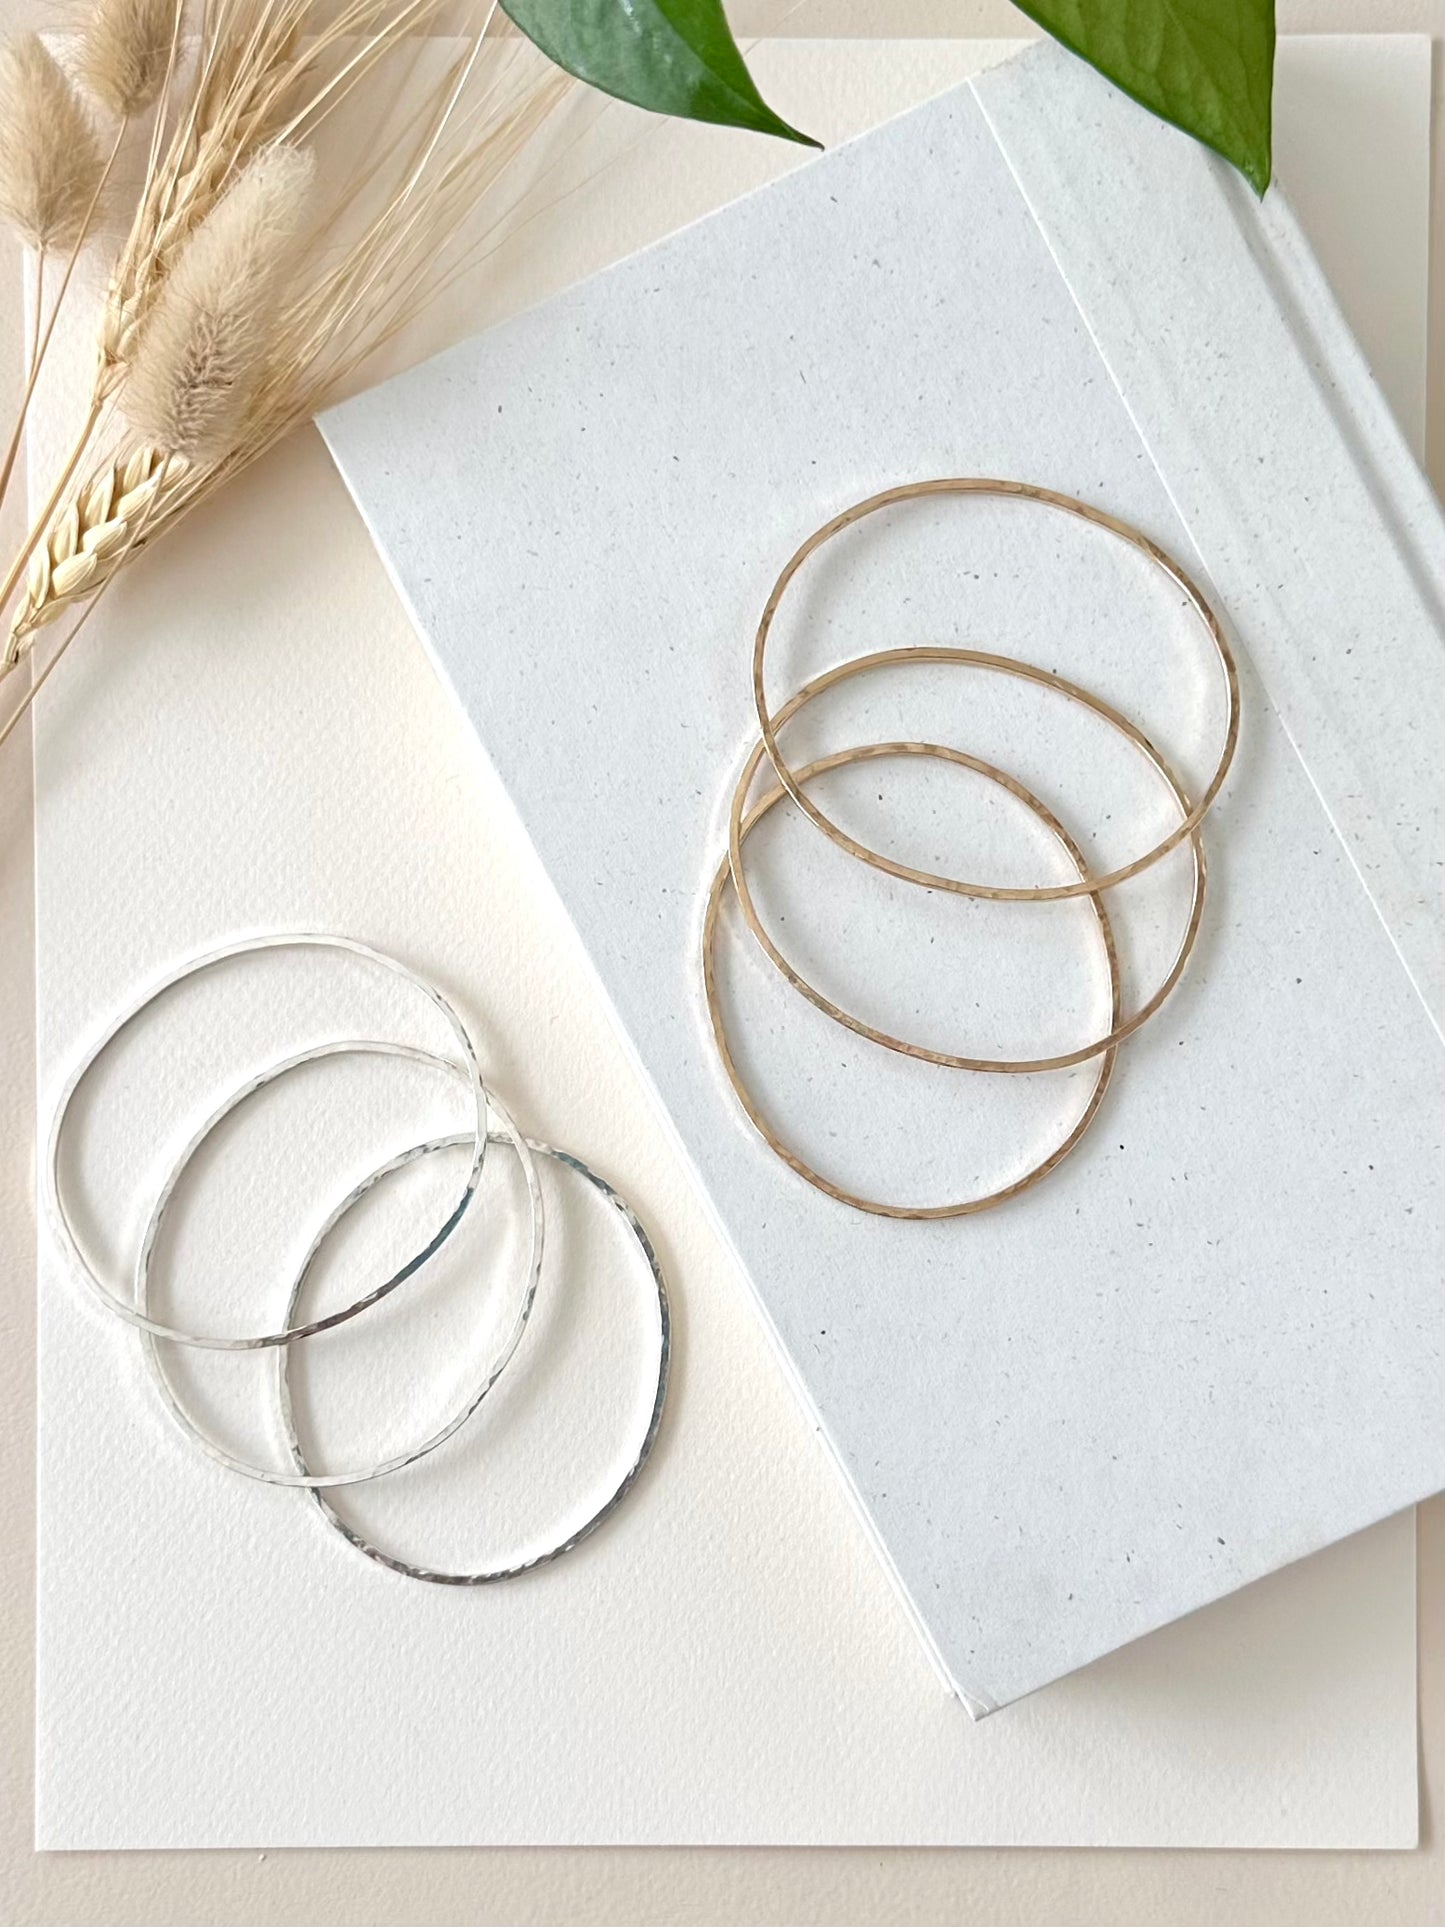 three gold bangle bracelets and three sterling silver bangle bracelets displayed on a textured white background with dried grasses and greenery